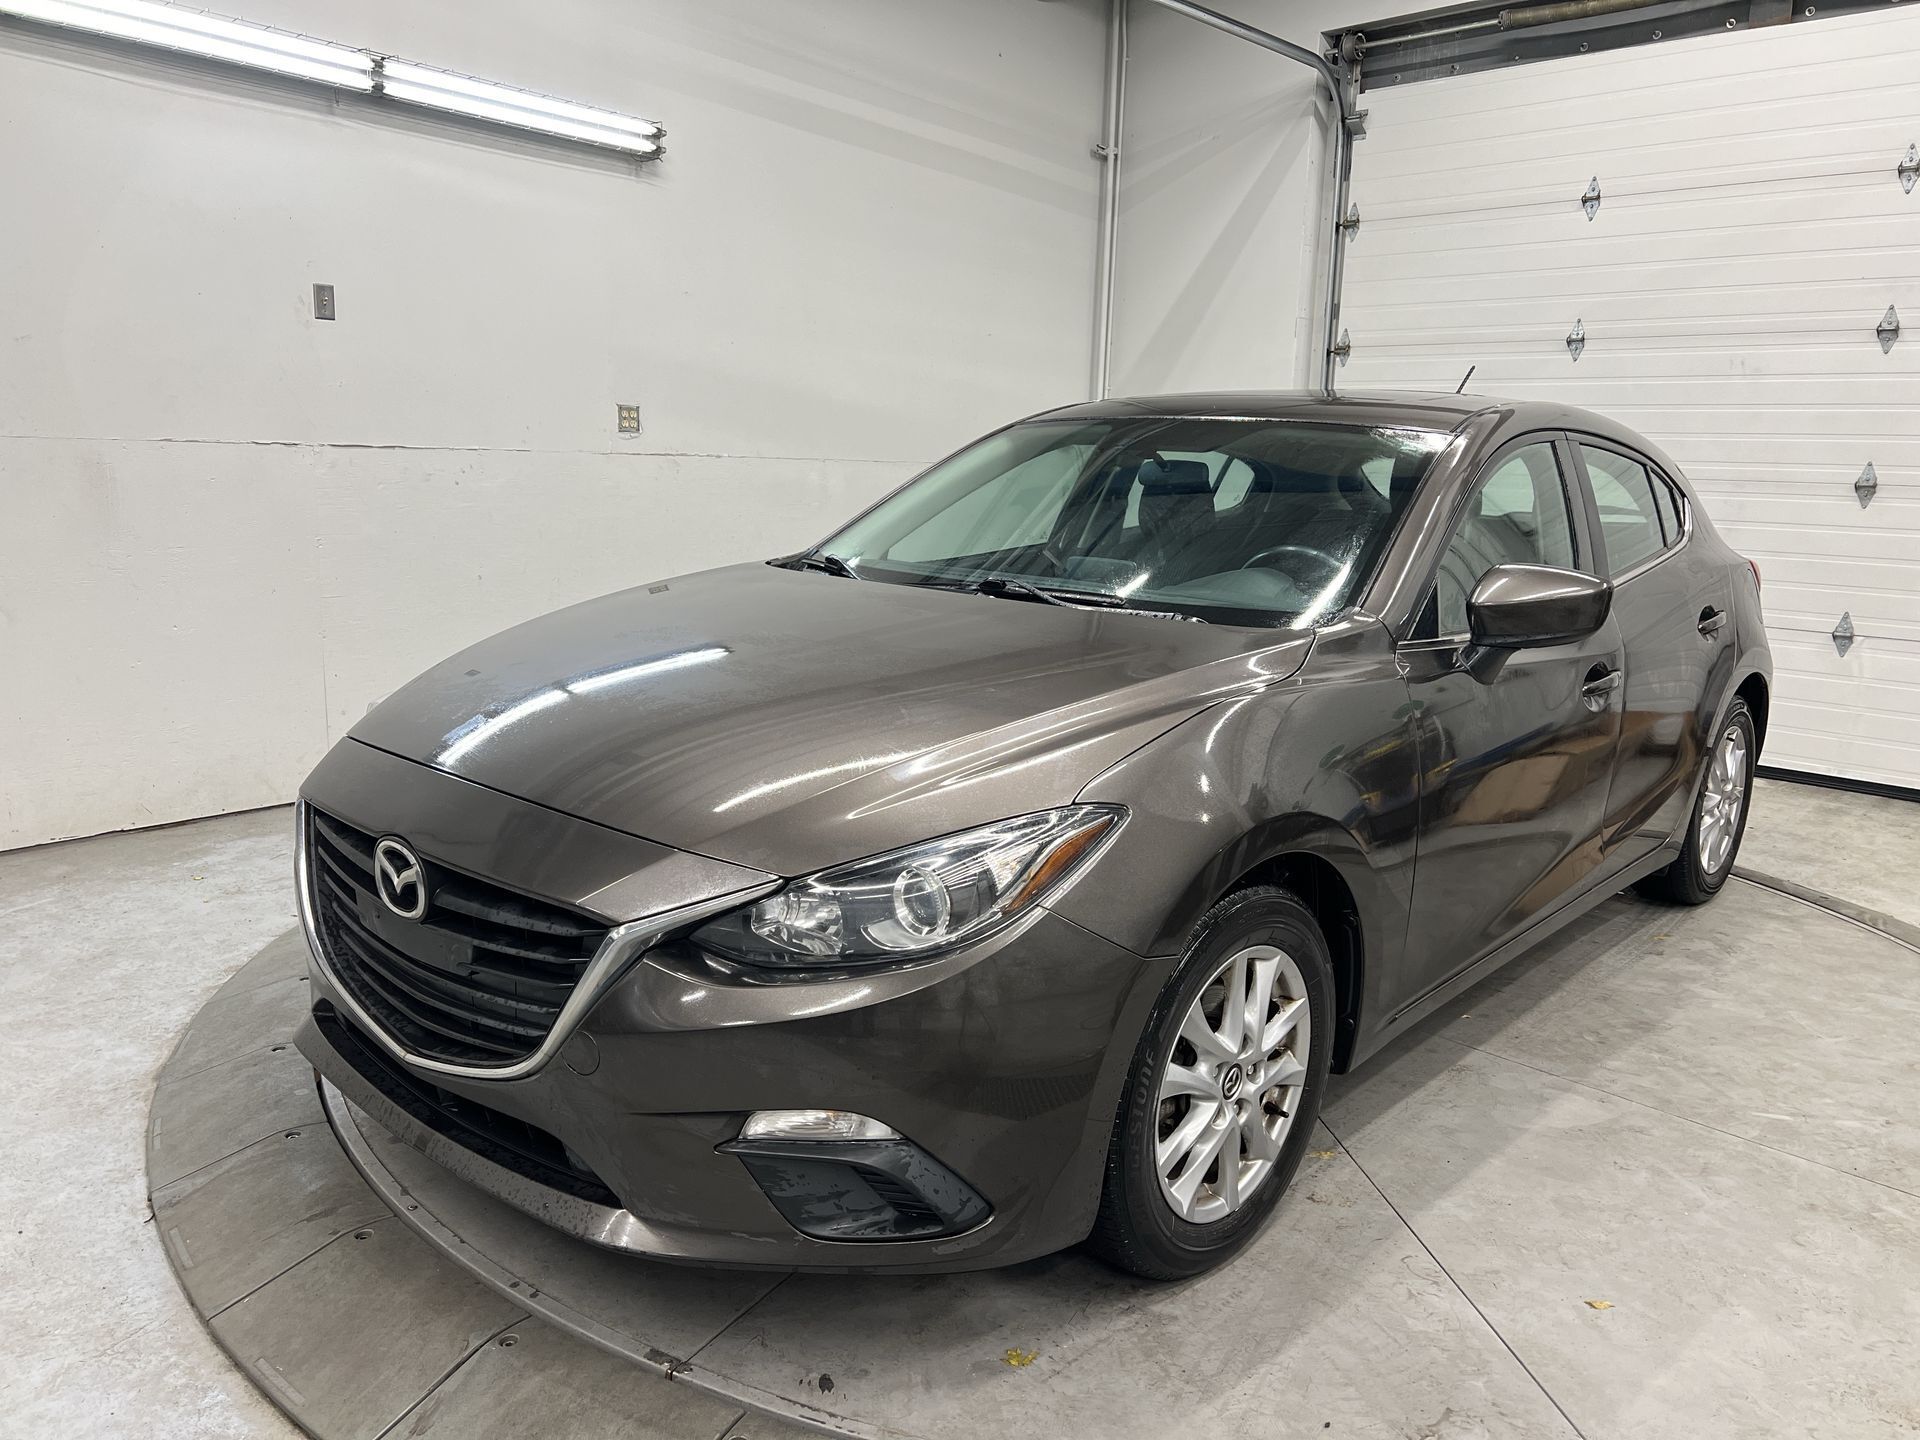 2016 Mazda Mazda3 Sport GS SPORT | SUNROOF | HTD SEATS |REAR CAM |LOW KMS!